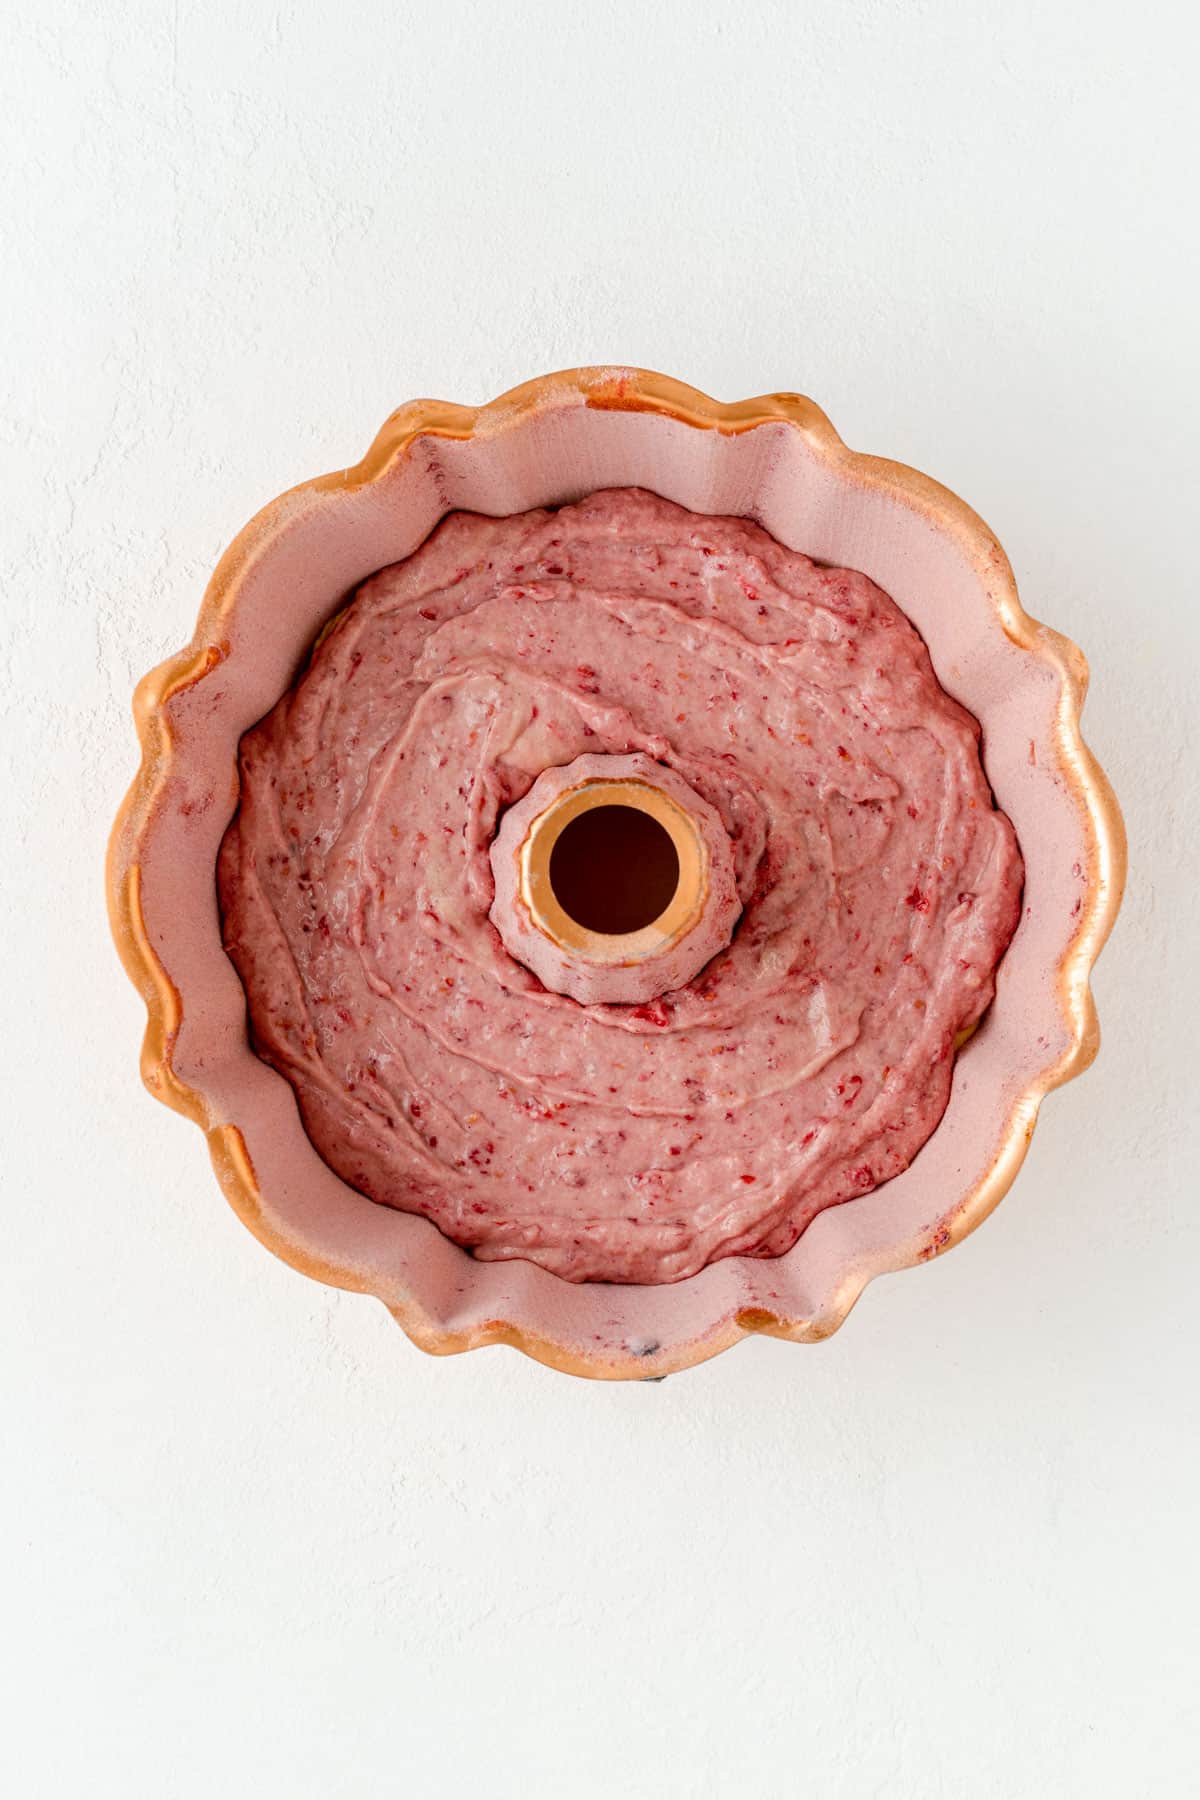 Copper Bundt pan with raspberry batter layer on white background.